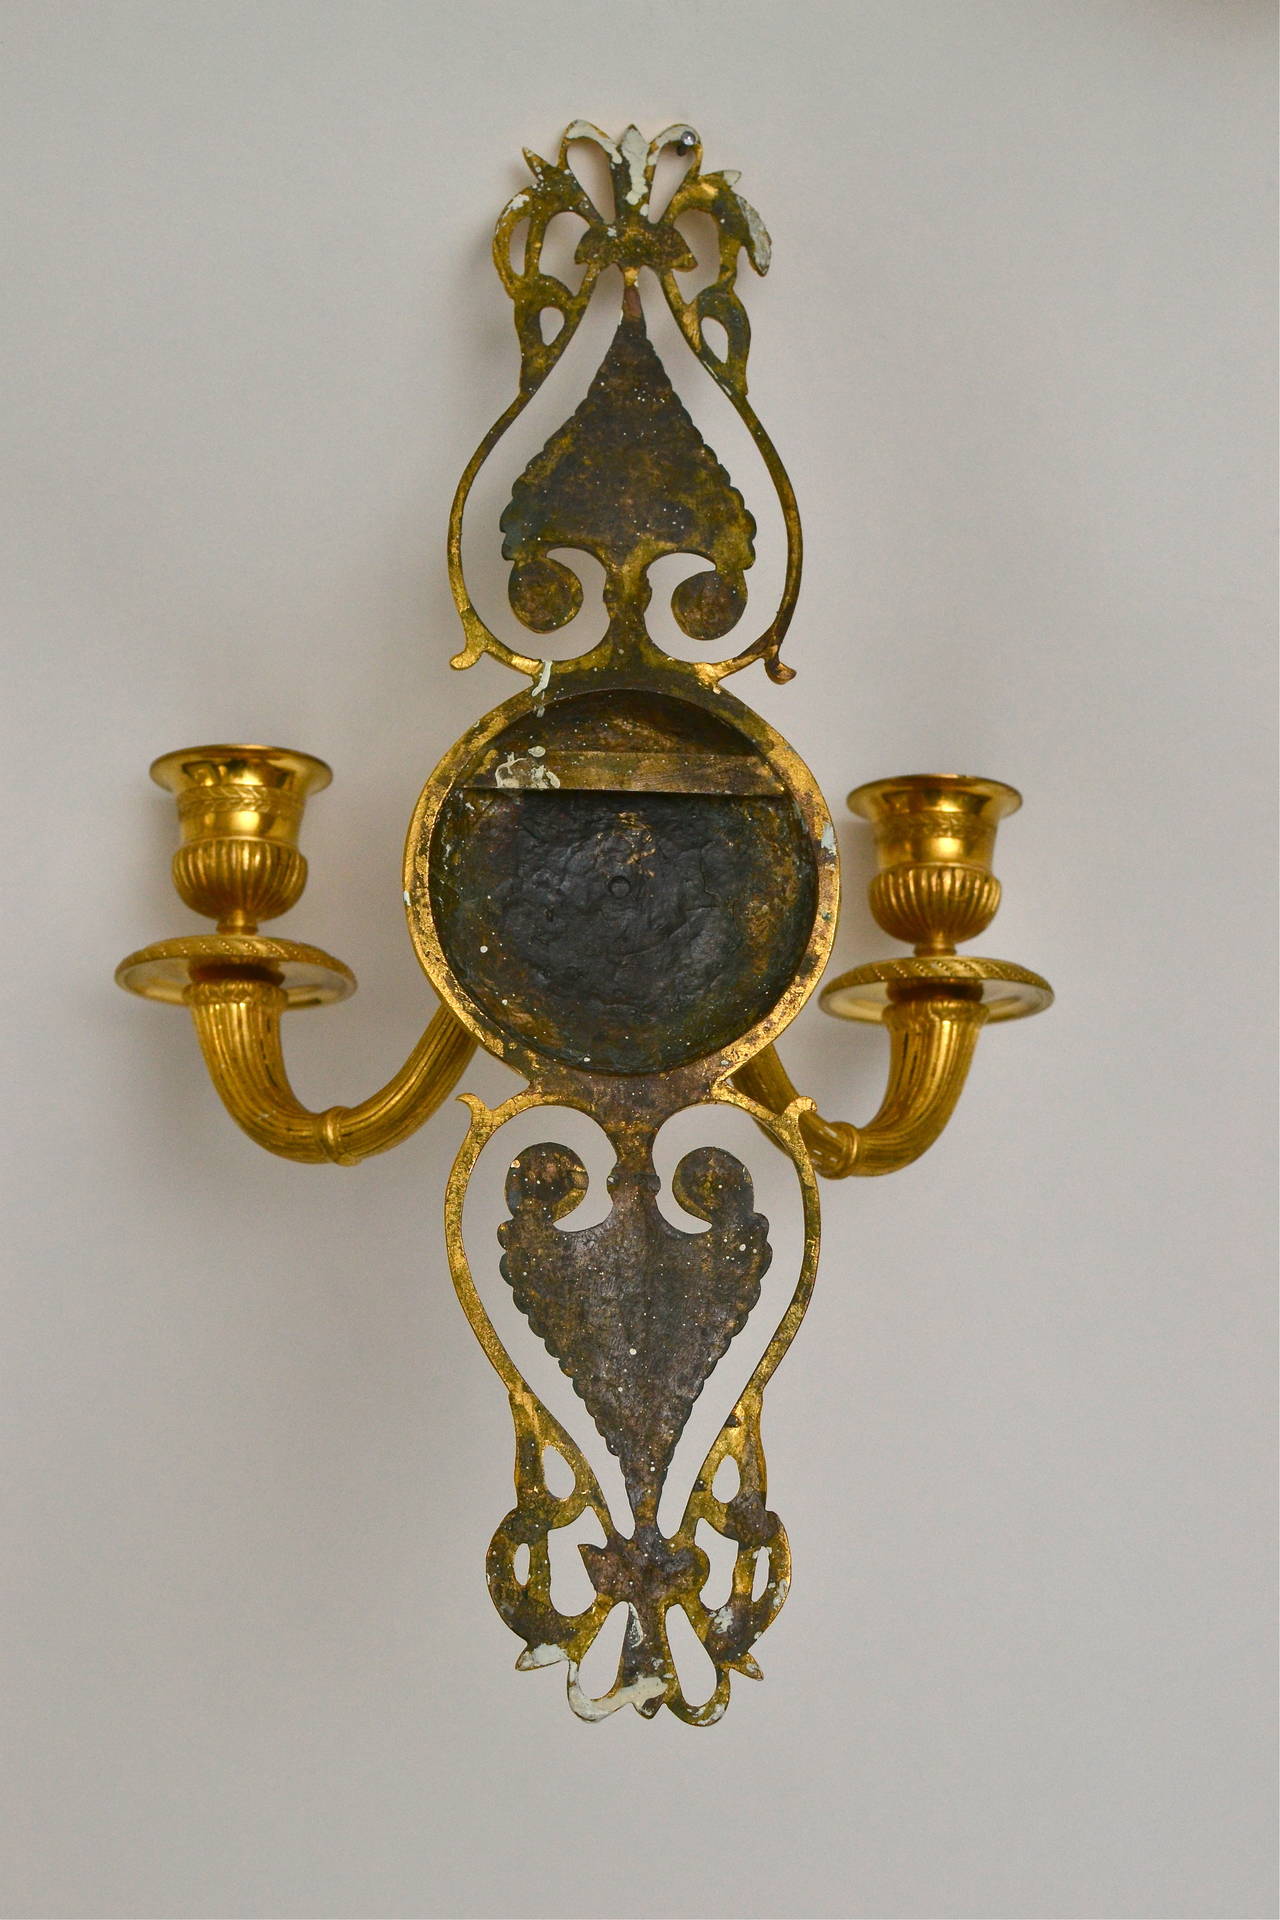 Gilt Set of Four, Two-Candle Empire Wall Appliqués, Early 19th Century